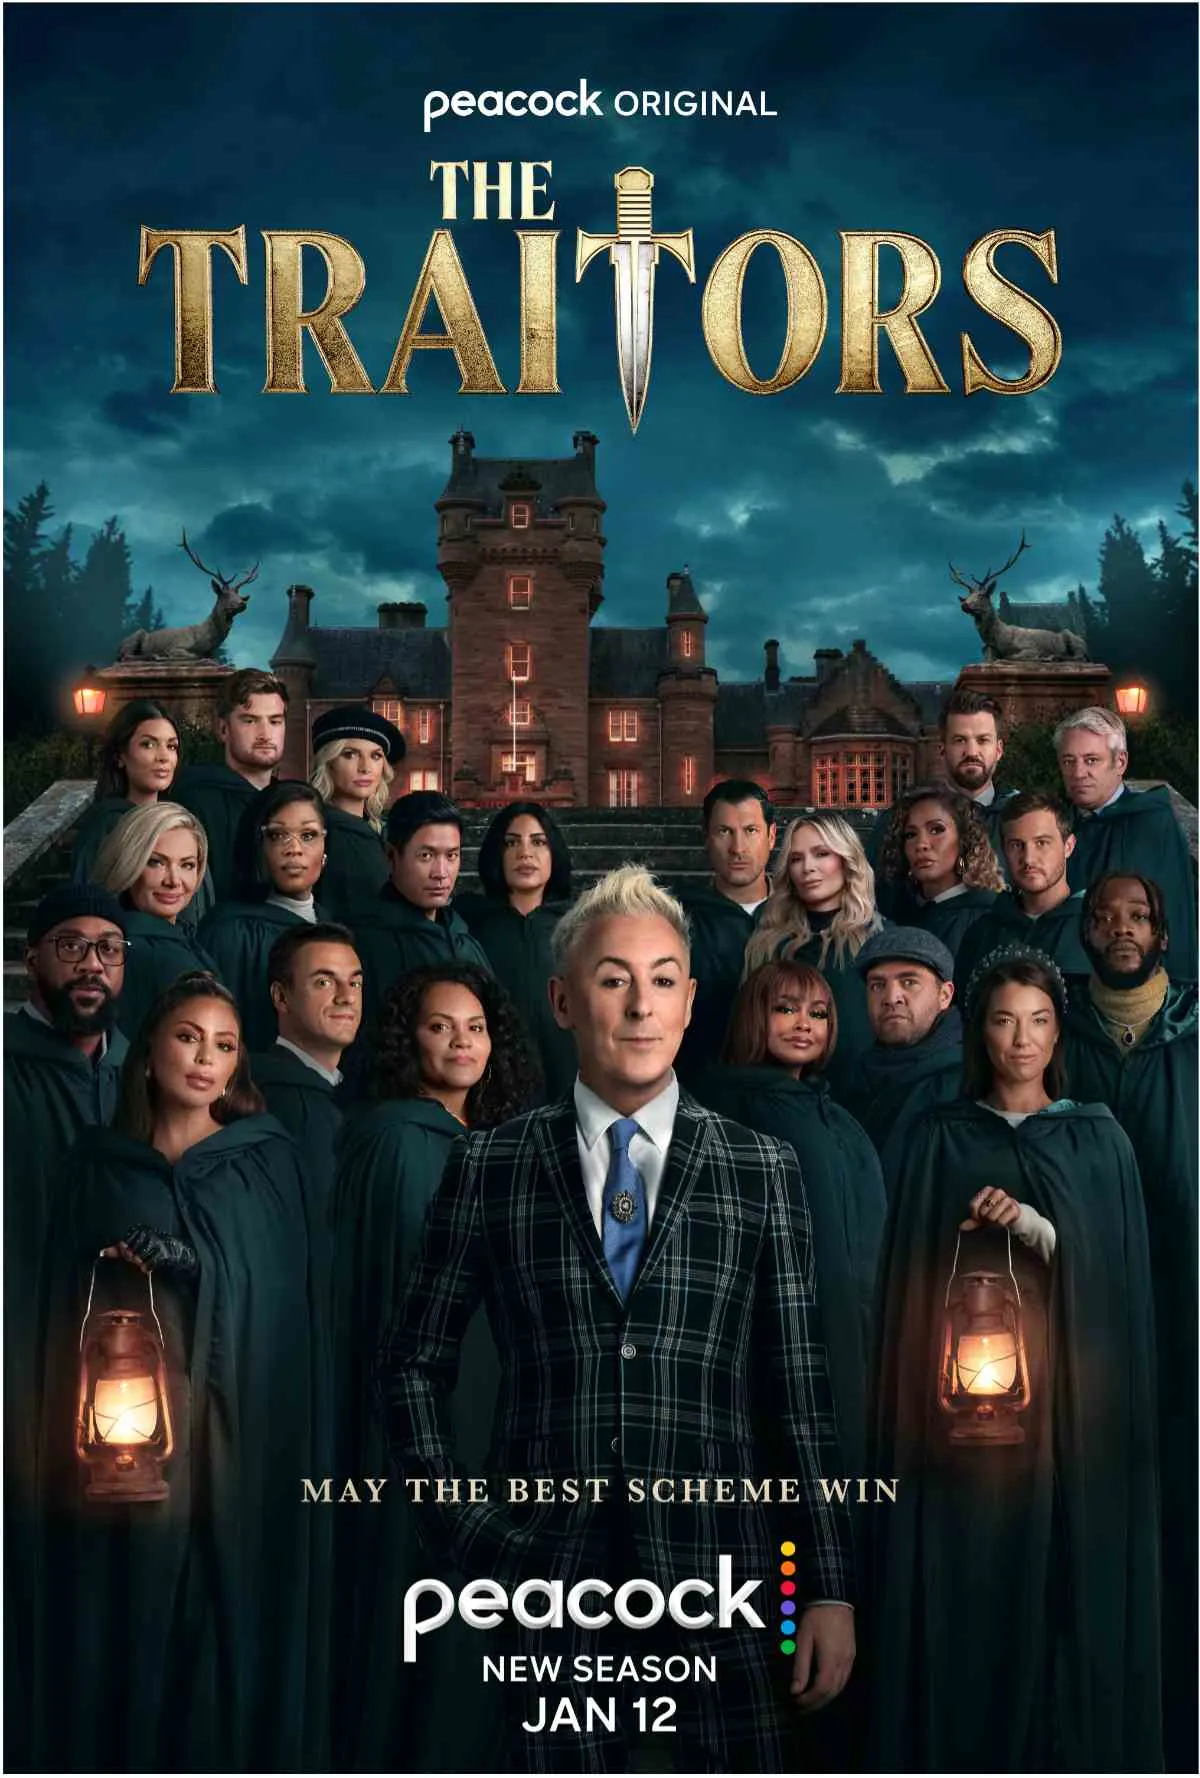 The Traitors Season 2 First Look